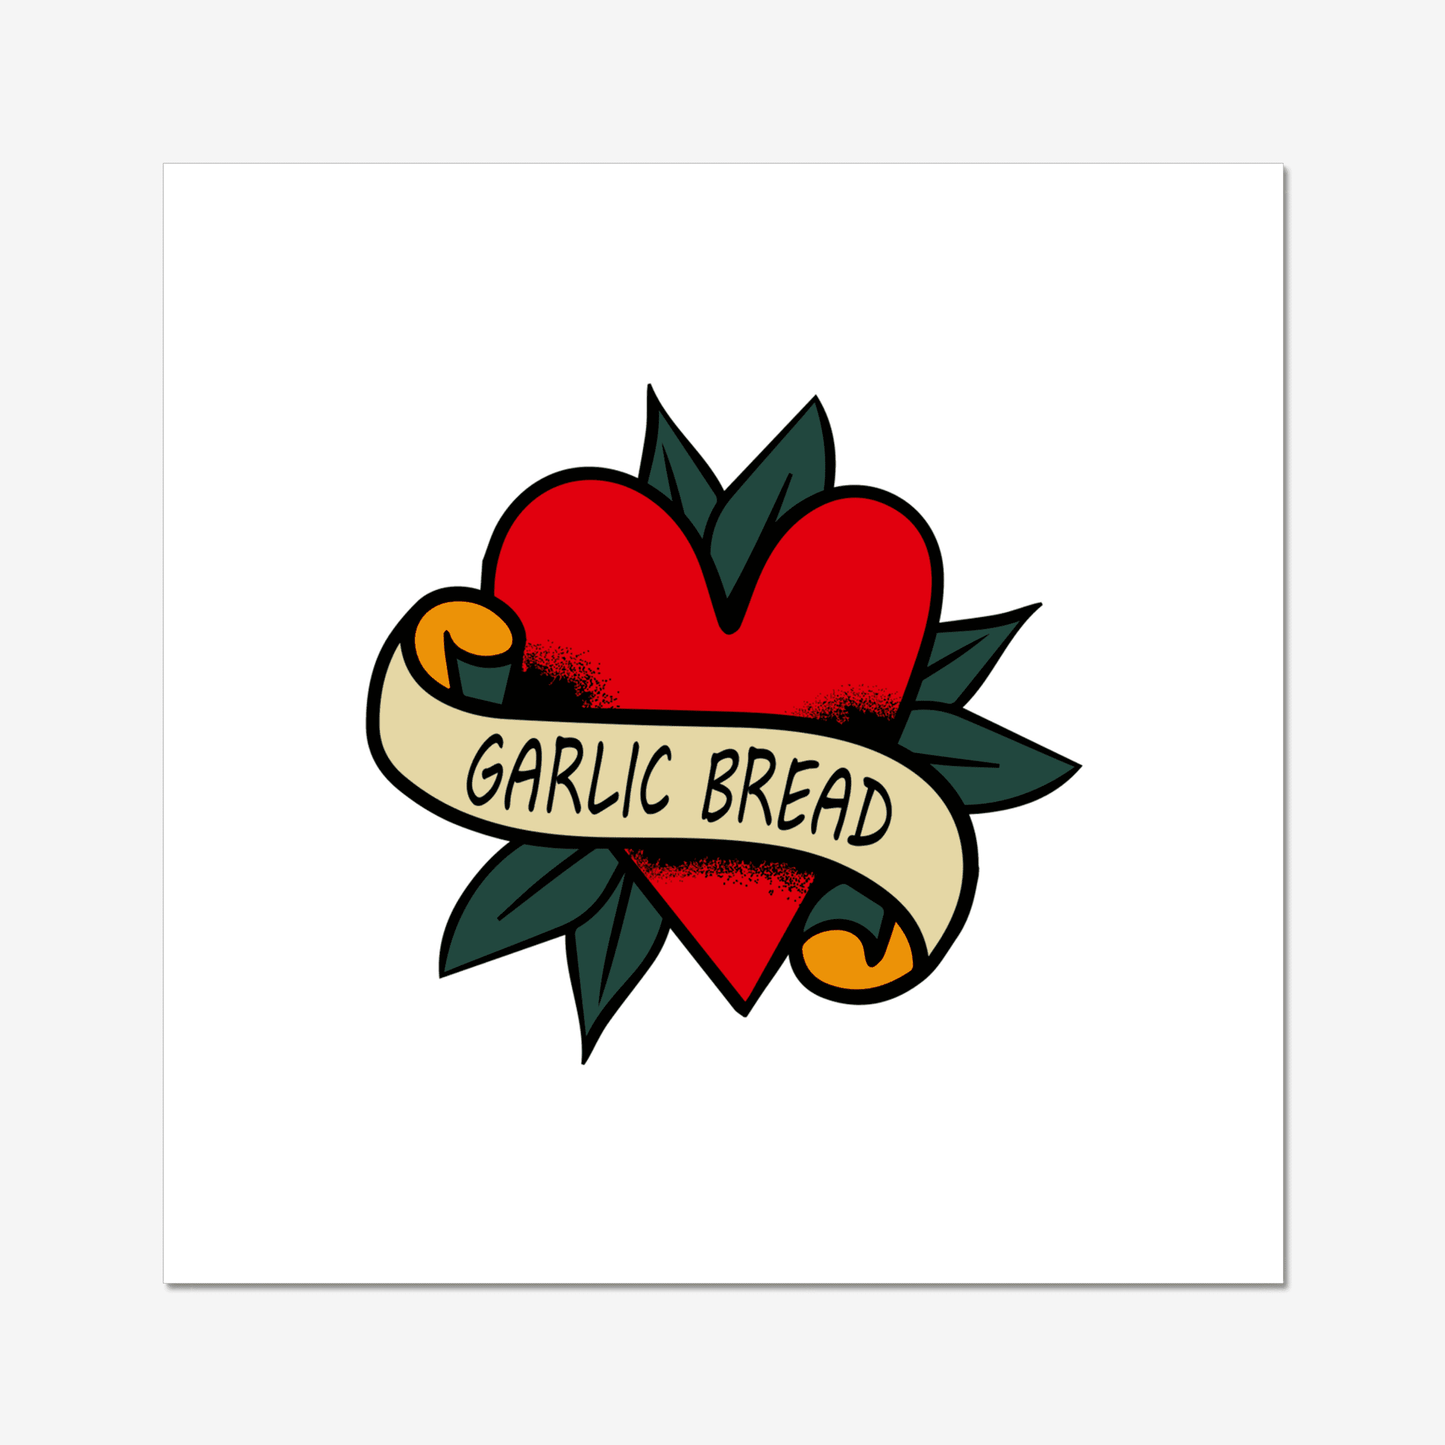 Traditional tattoo style print, celebrating the universal love of the tastiest bread in the world.... the mighty garlic bread!!  Because who doesn't love garlic bread, right?  This is one of our most popular prints. With its bold and quirky design, it fits in perfectly with an eclectic home decor style.  Perfect for a gallery wall, a statement piece or a special gift.